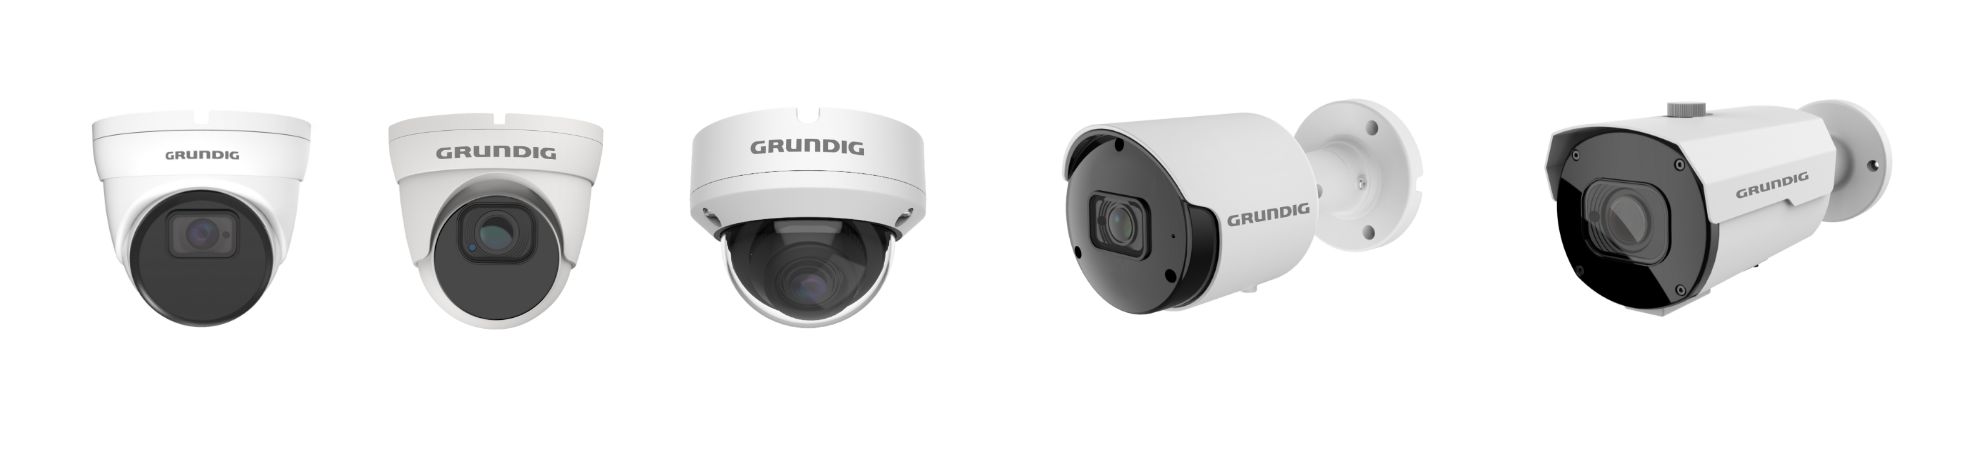 Powering Up Your Security: Advantages of Axxon One and Grundig SMART line Cameras Integration